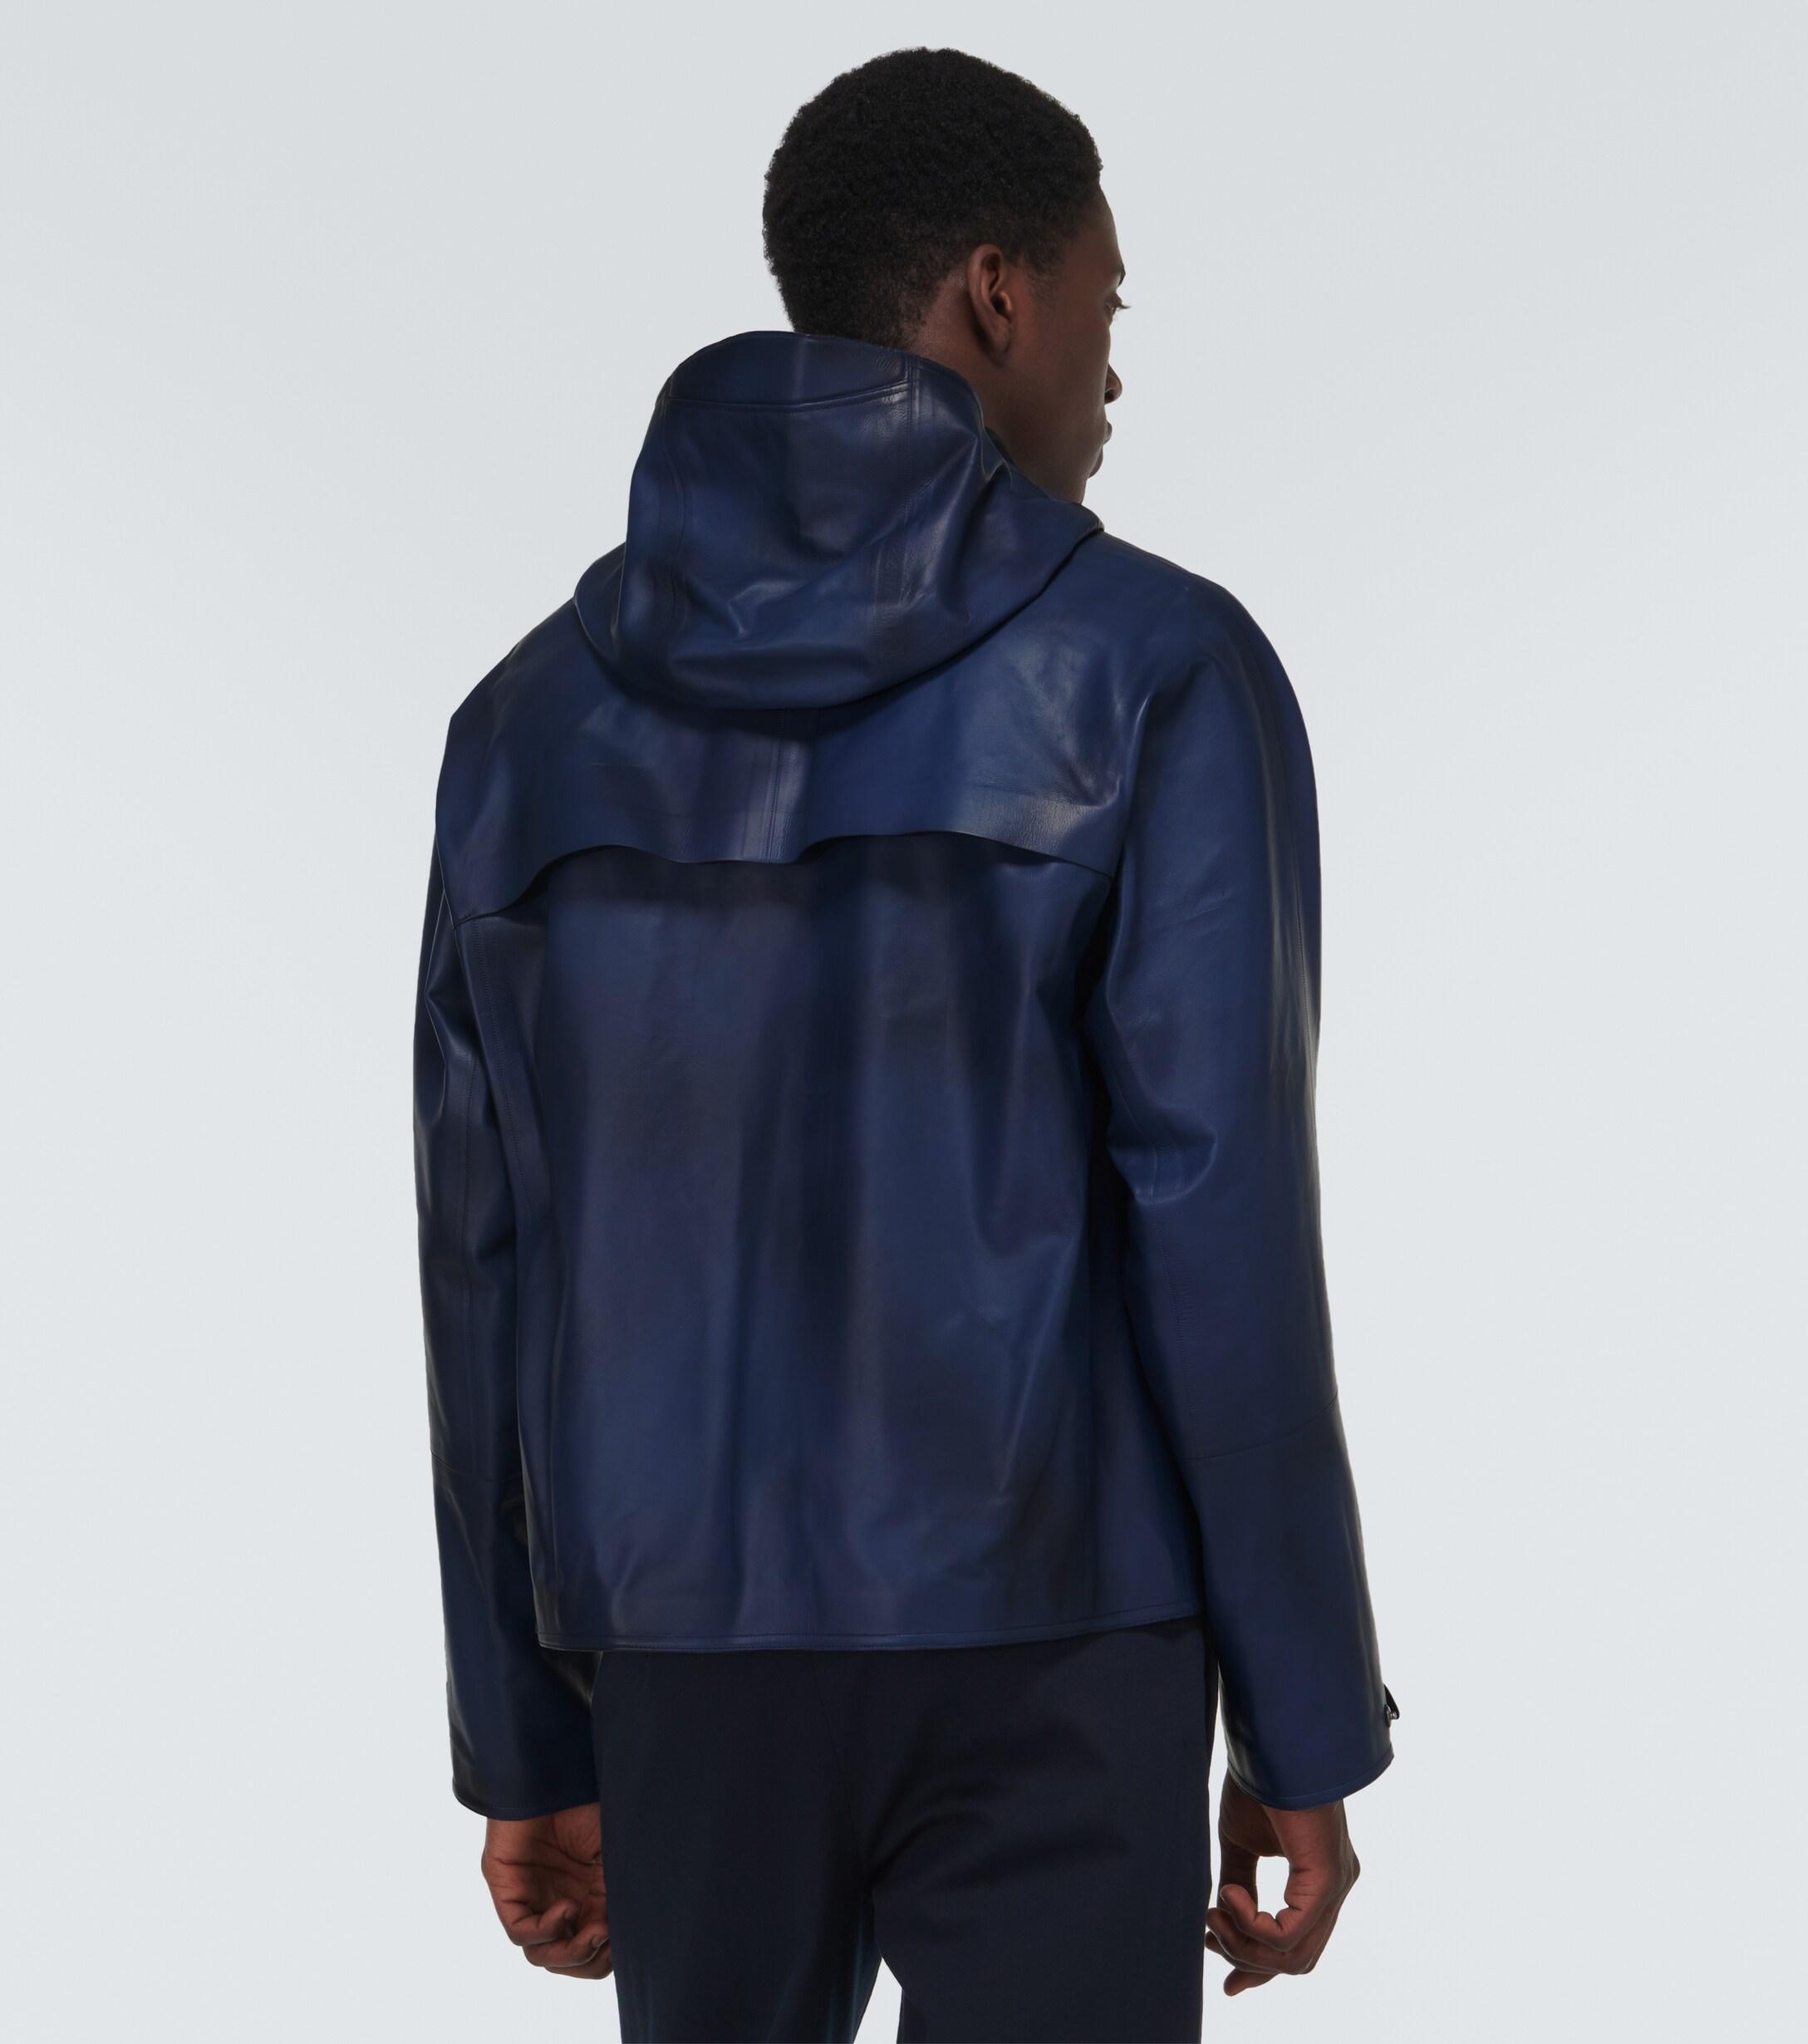 Berluti Cashmere Leather Hooded Sweater - パーカー